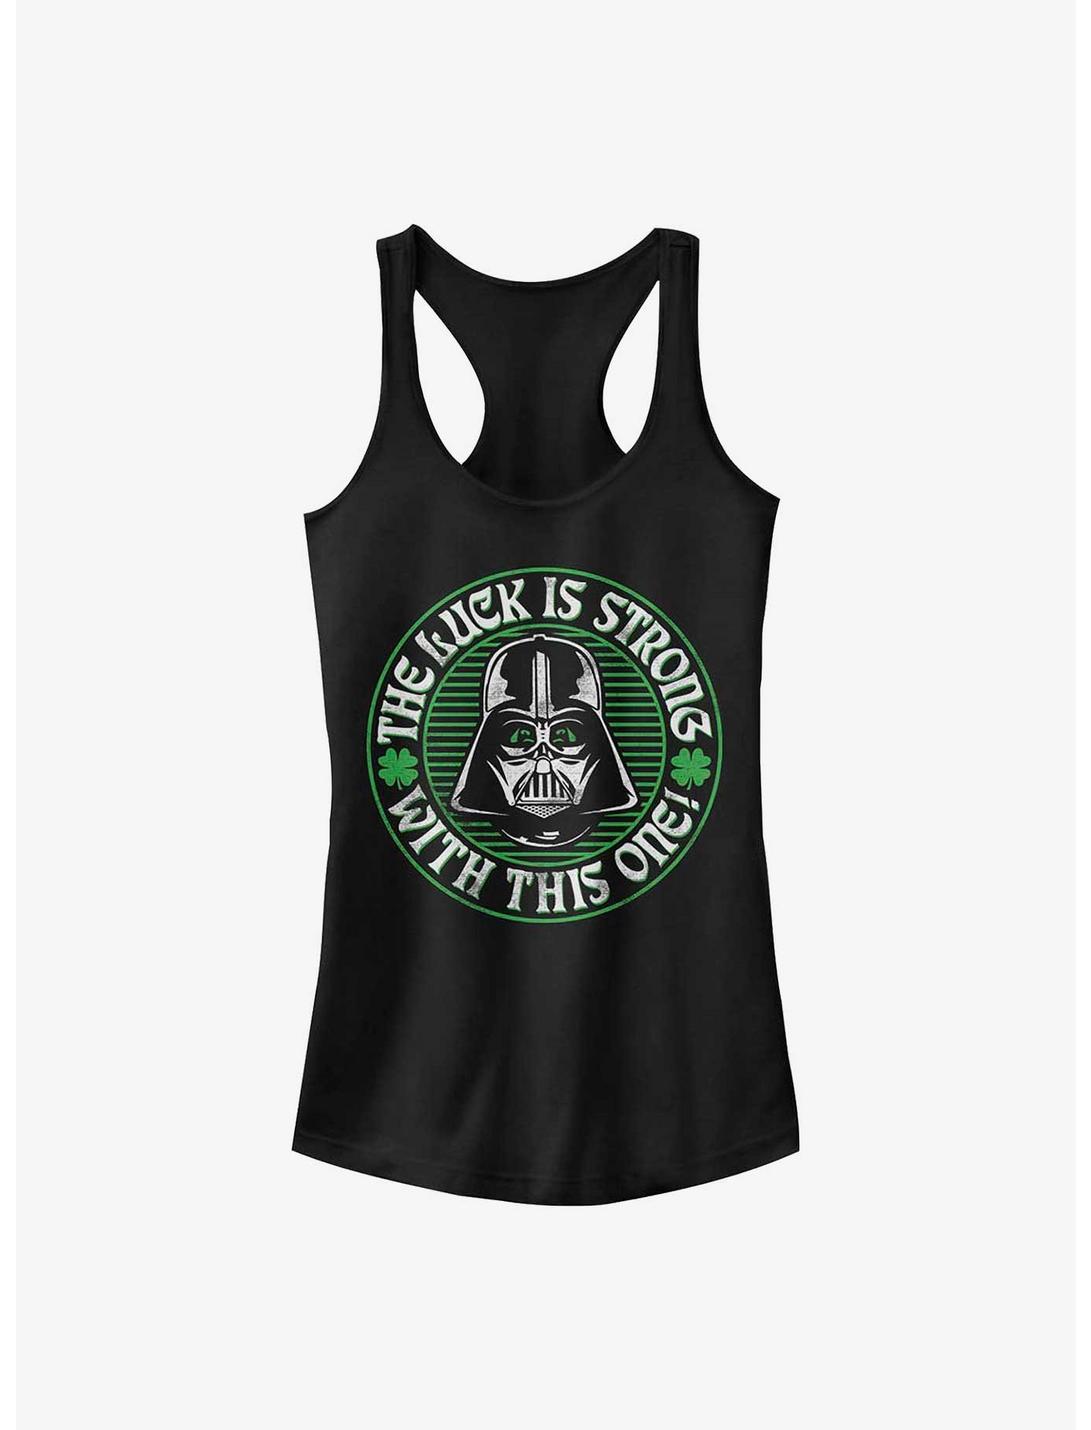 Star Wars Luck Is Strong Girls Tank Top, BLACK, hi-res